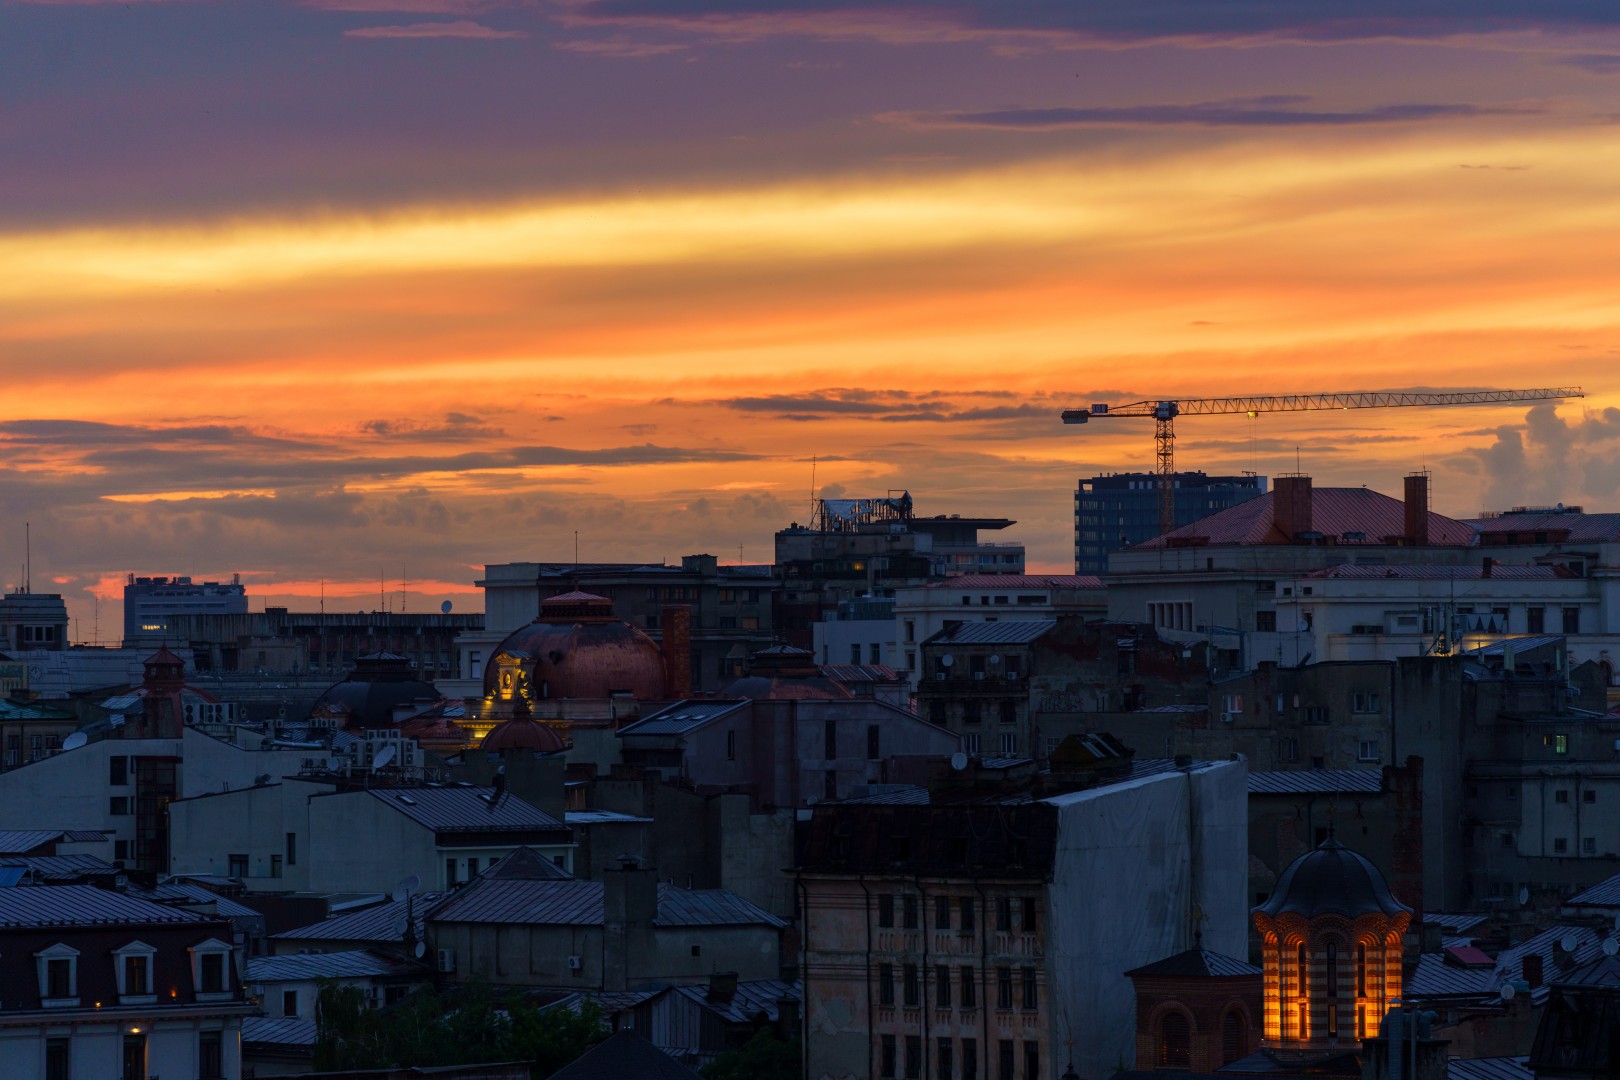 City Panorama in Bucharest on June 11, 2021 (f22096f27f)